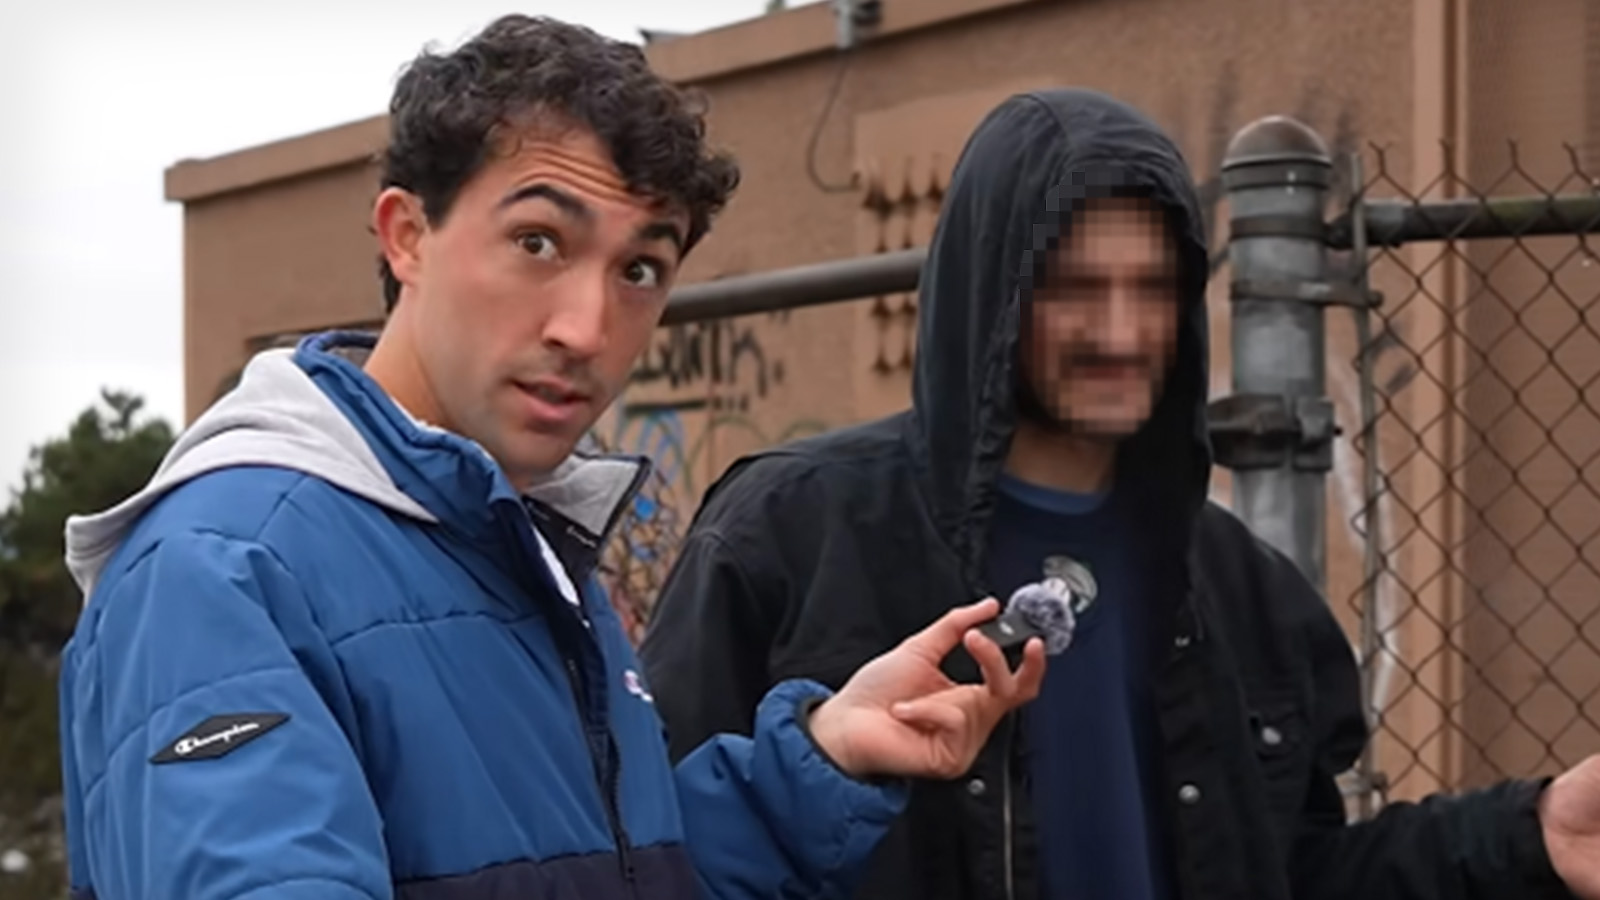 YouTuber accused of “exploiting” homeless people for views in viral video